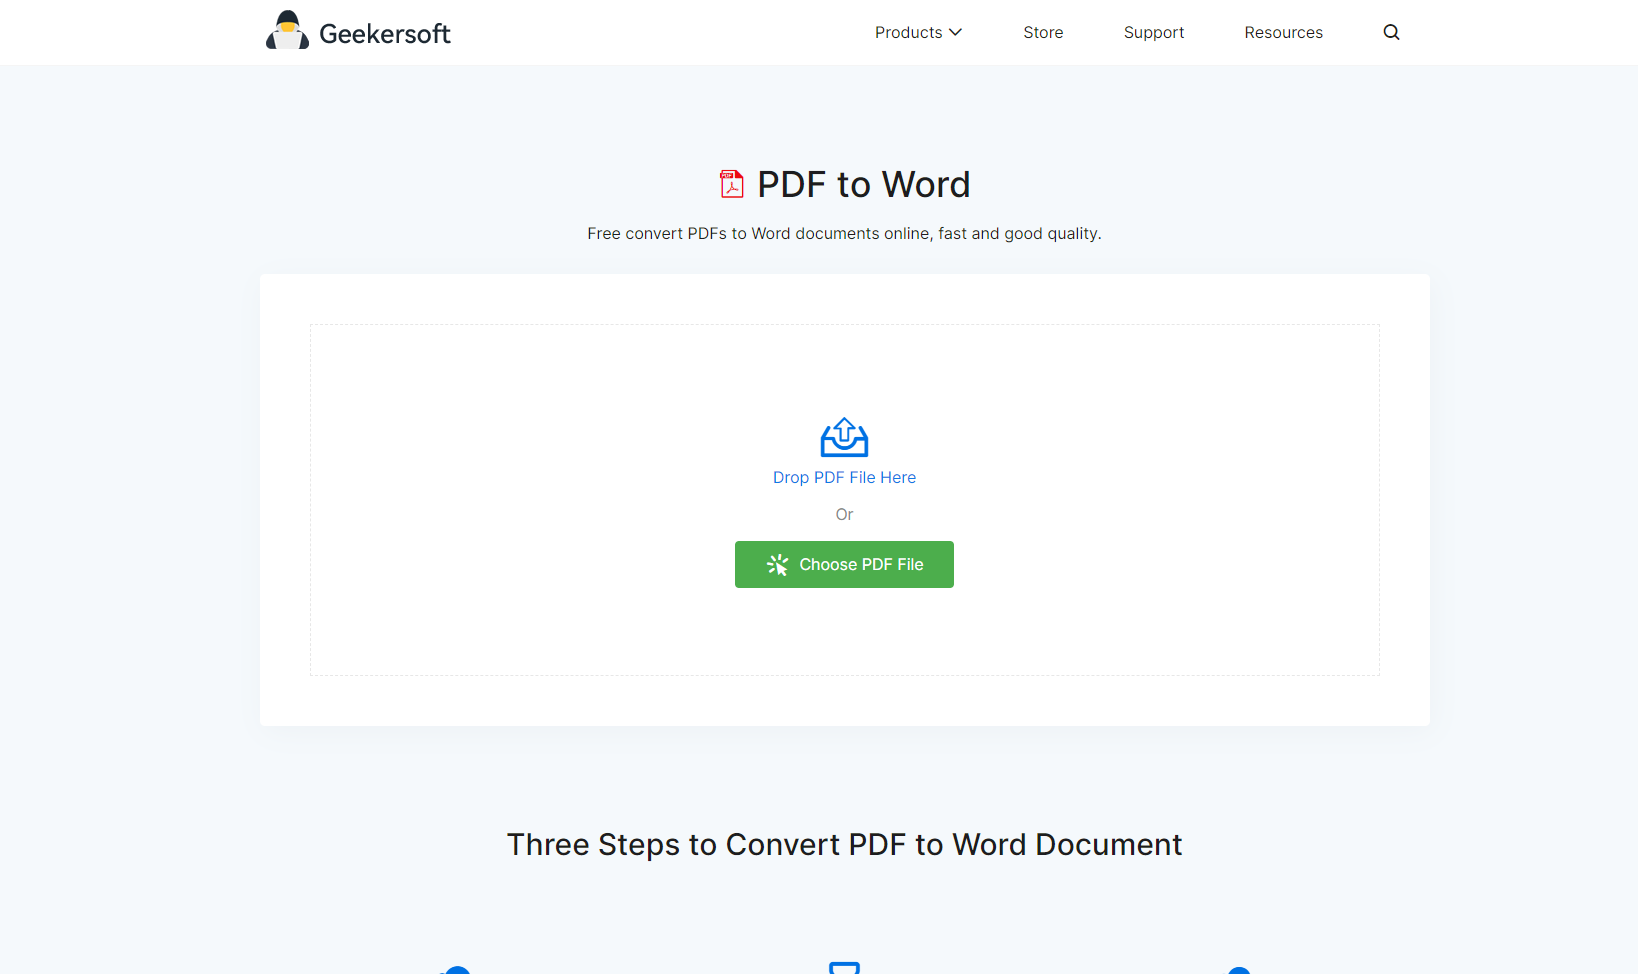 Geekersoft PDF to Word Landing page